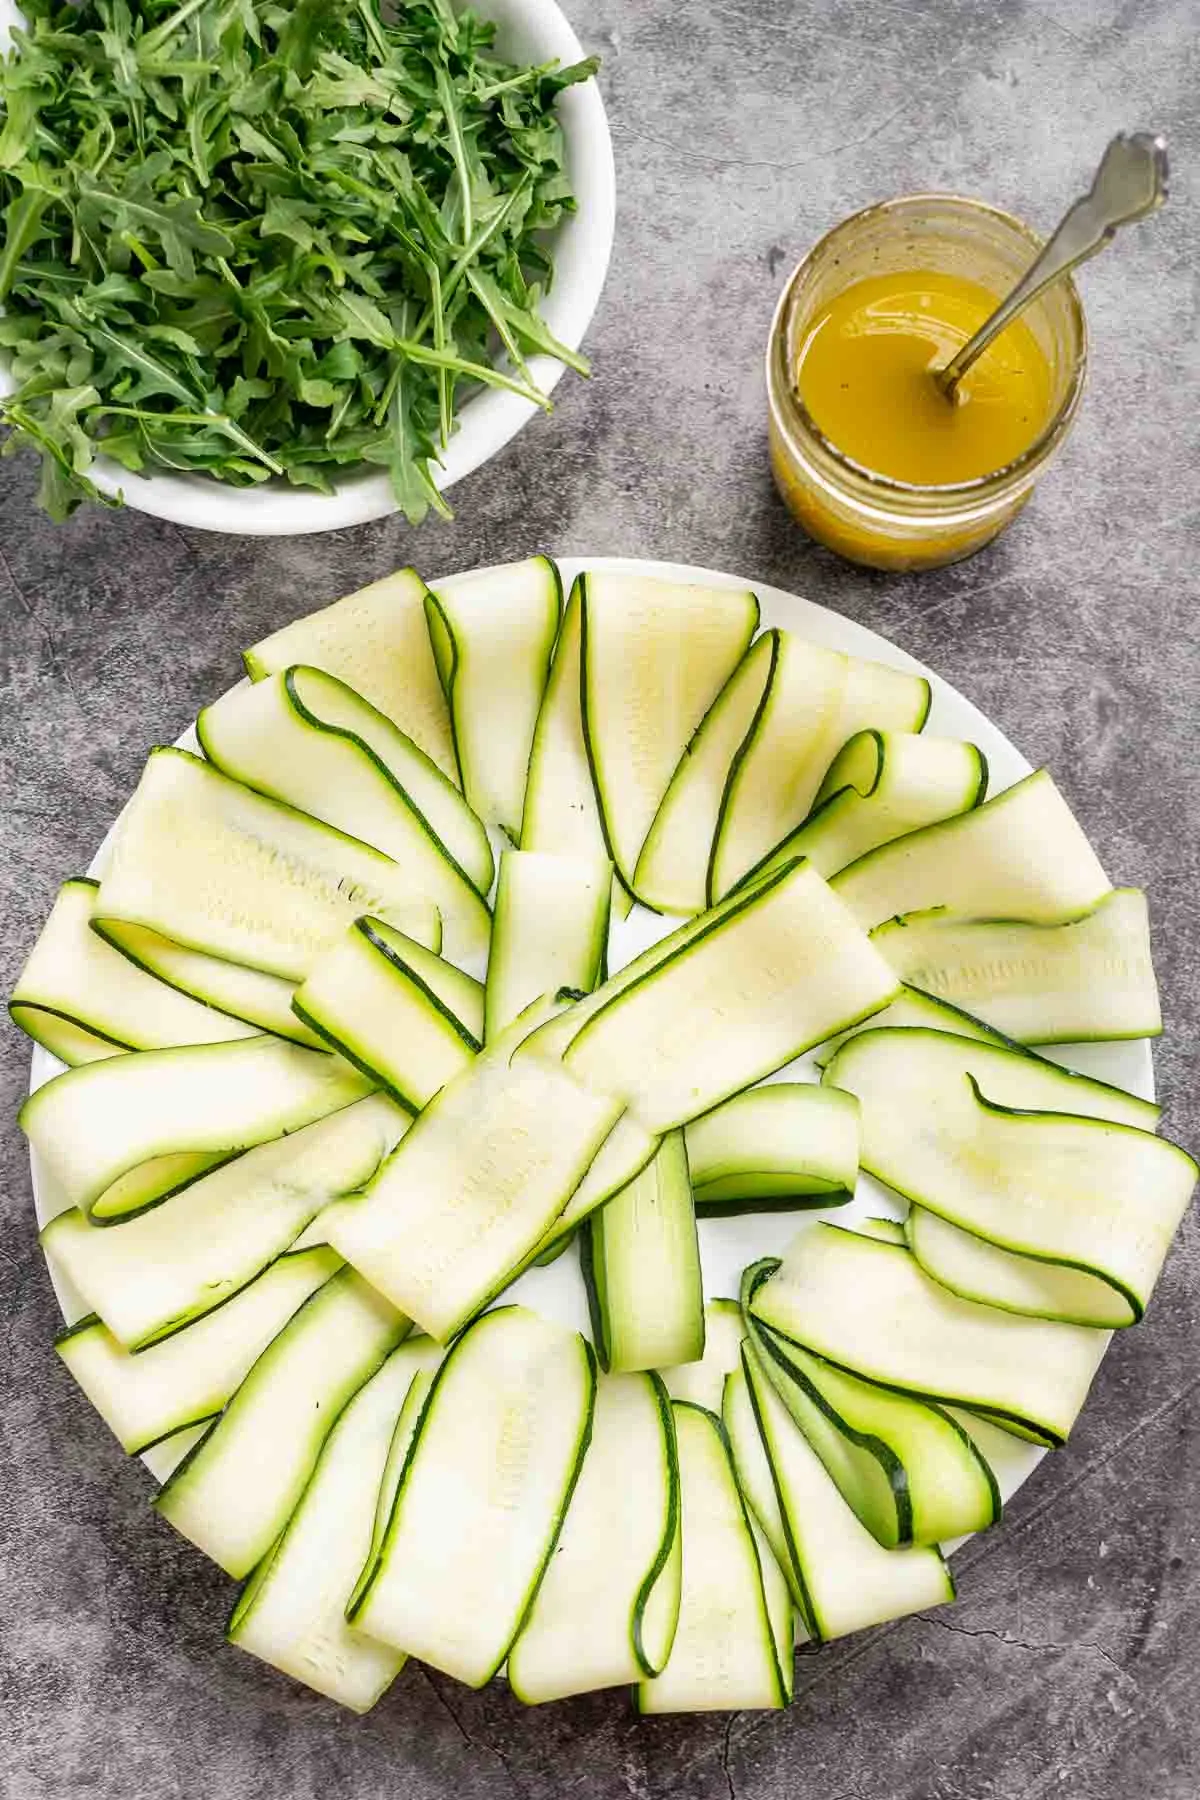 Sliced zucchini ribbons arranged on a plate